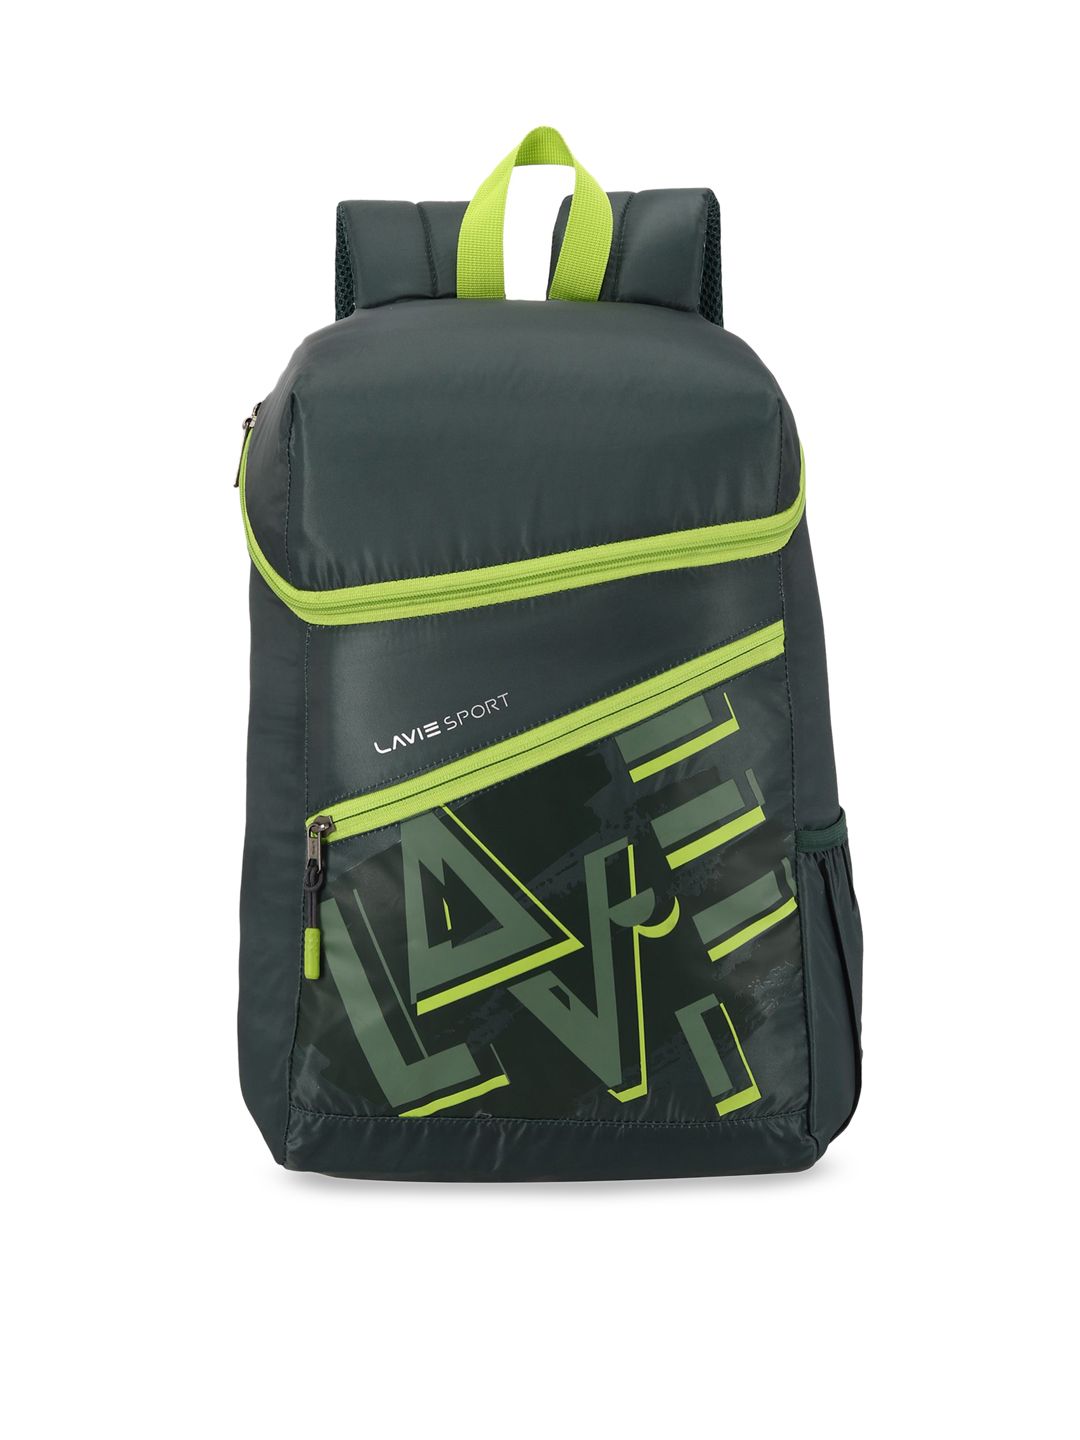 LAVIE SPORT Unisex Olive Green & Lime Green Typography Backpack Price in India